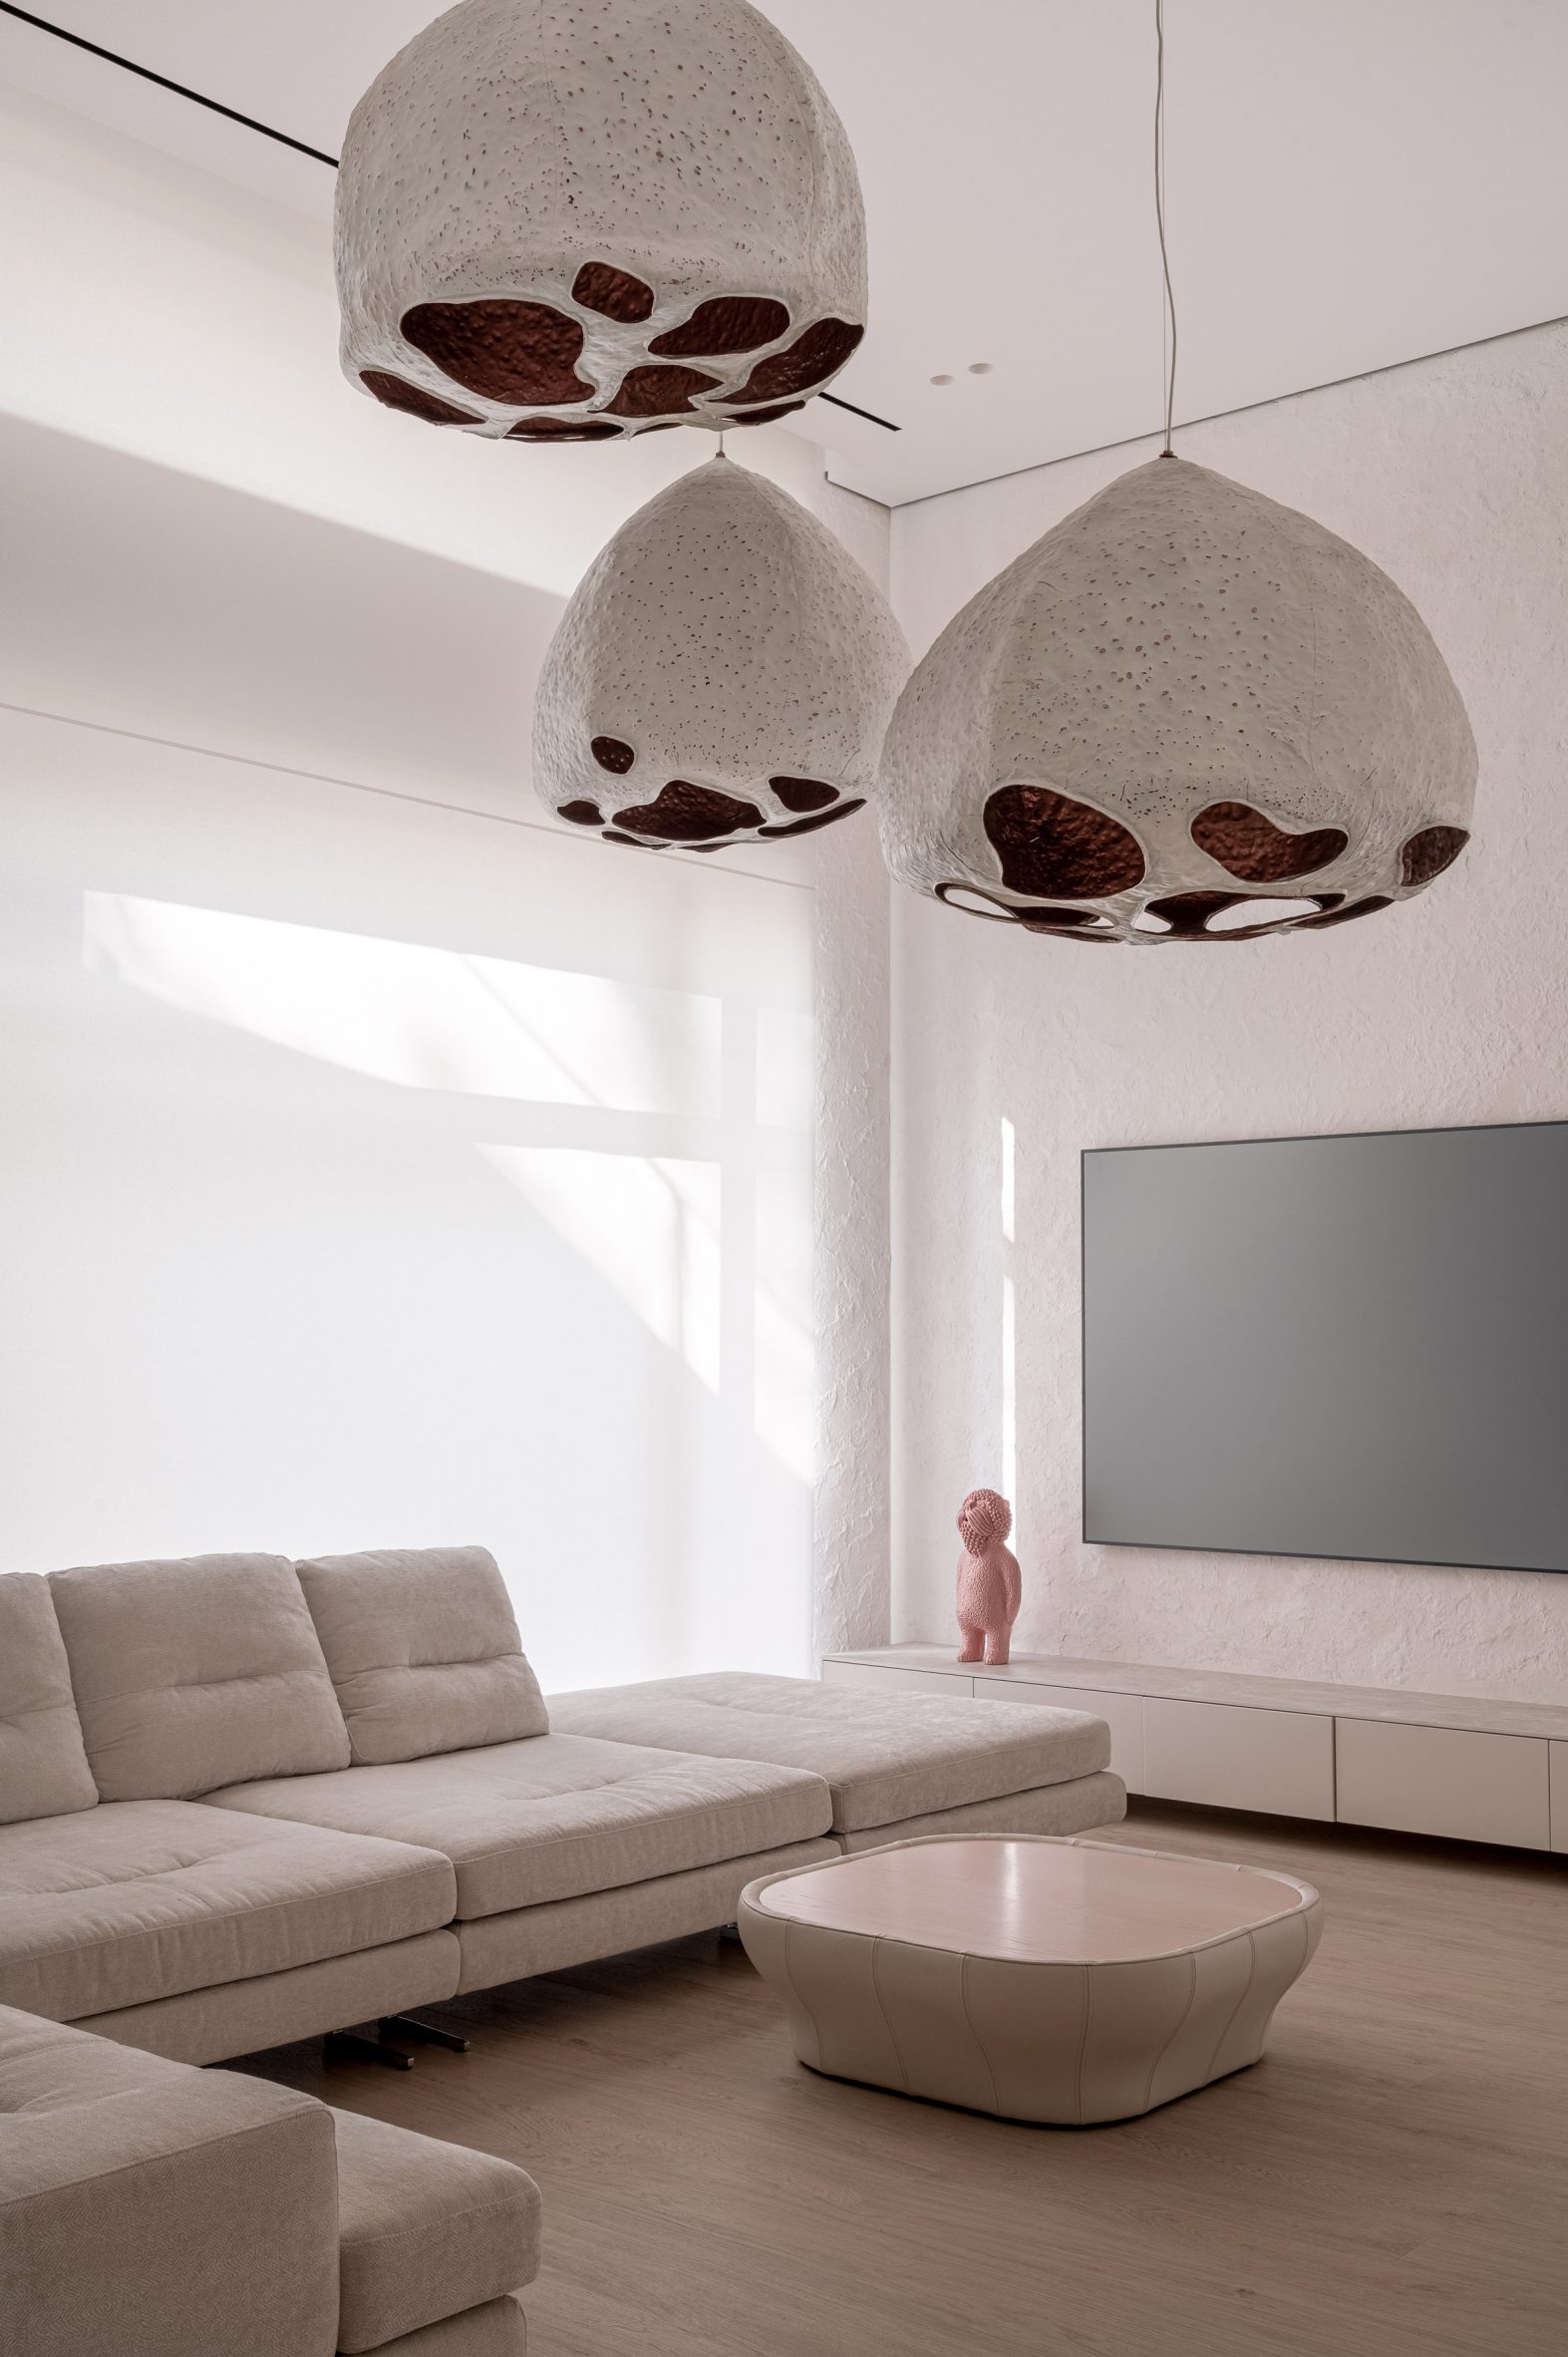 Living room of Mureli House with pendant light designed to look like seed pods